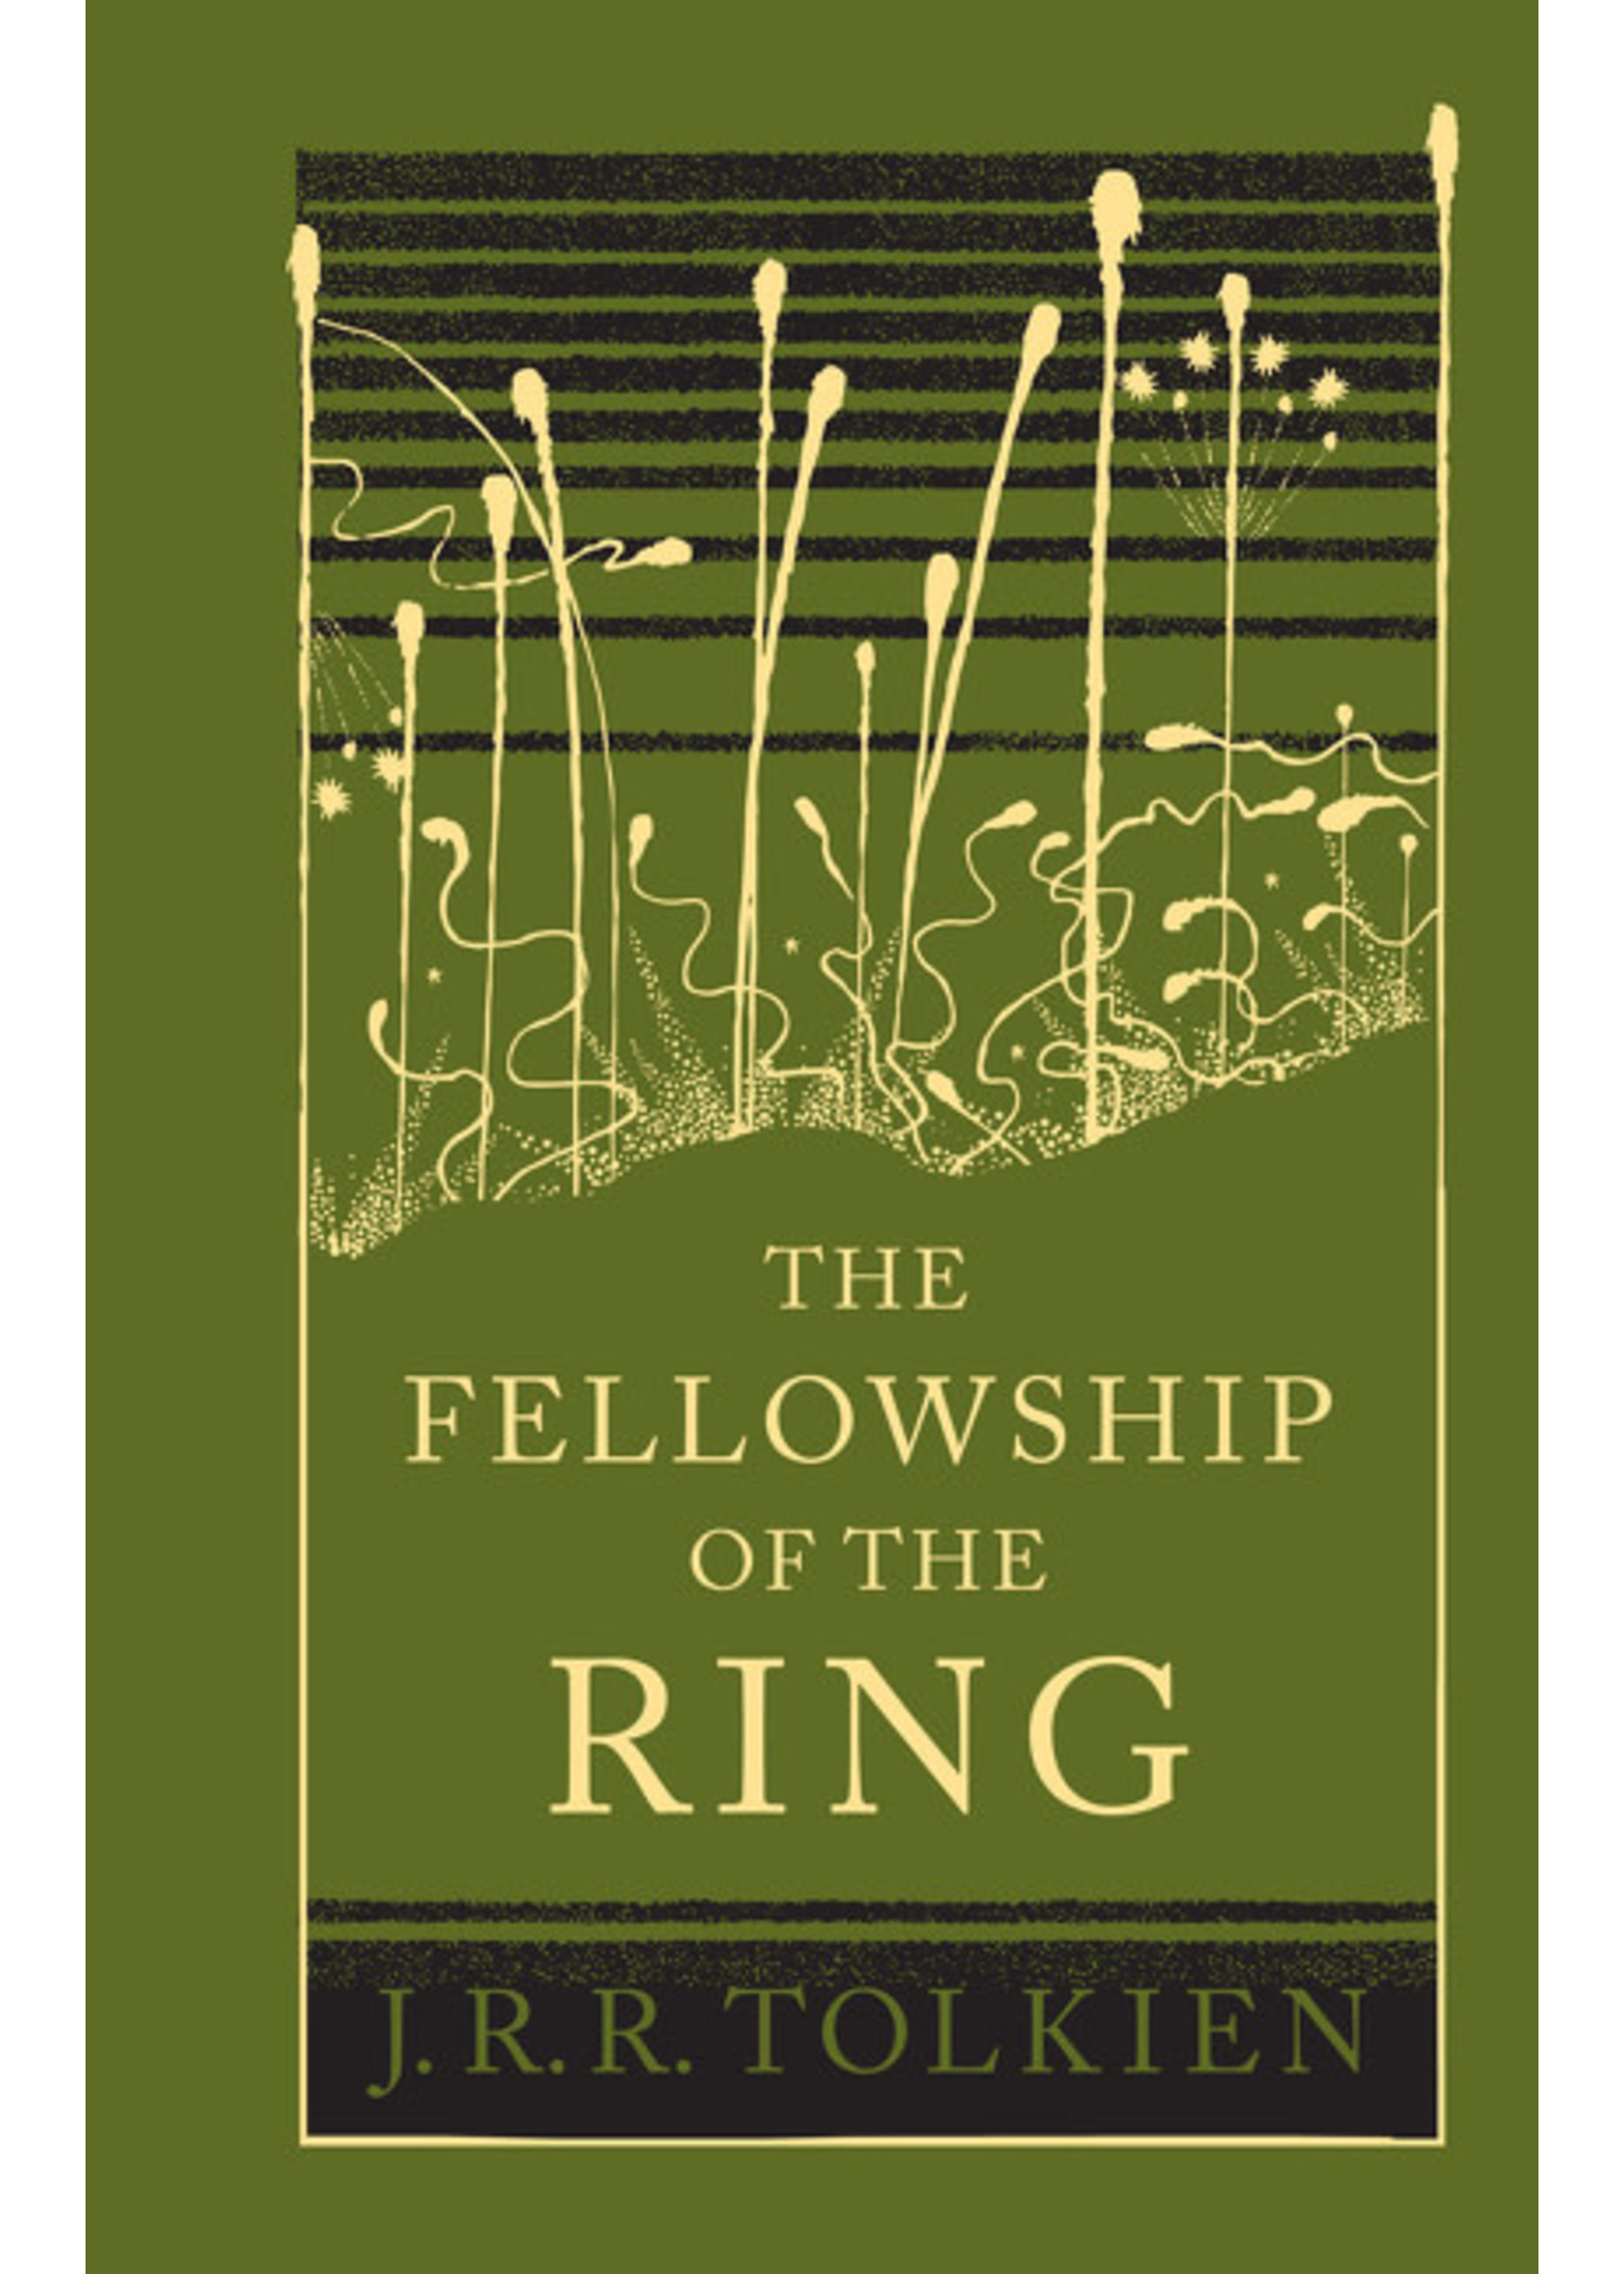 The Fellowship of the Ring (The Lord of the Rings #1) by J. R. R. Tolkien